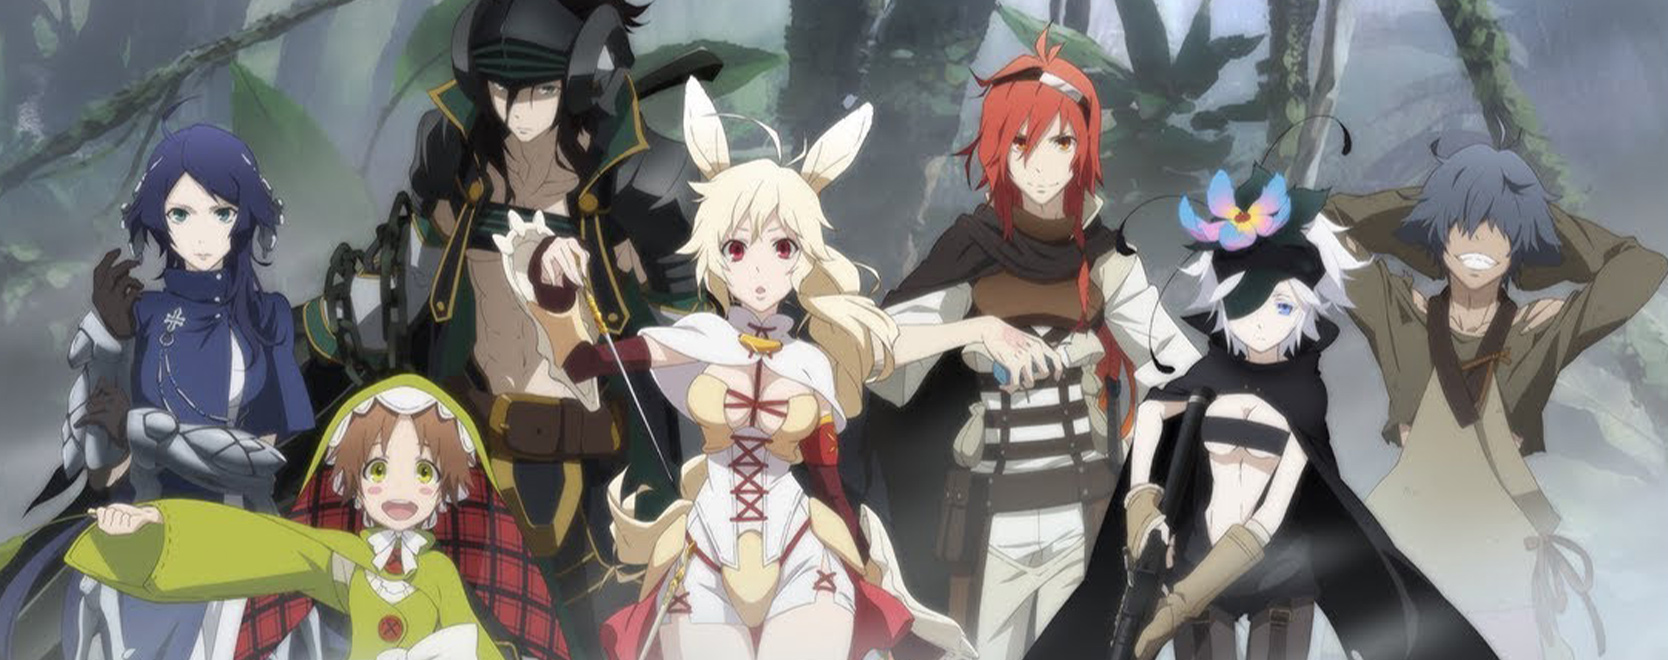 Rokka: Braves of the Six Flowers in Ger Dub Sub Anime2You. www.anime2you.de...